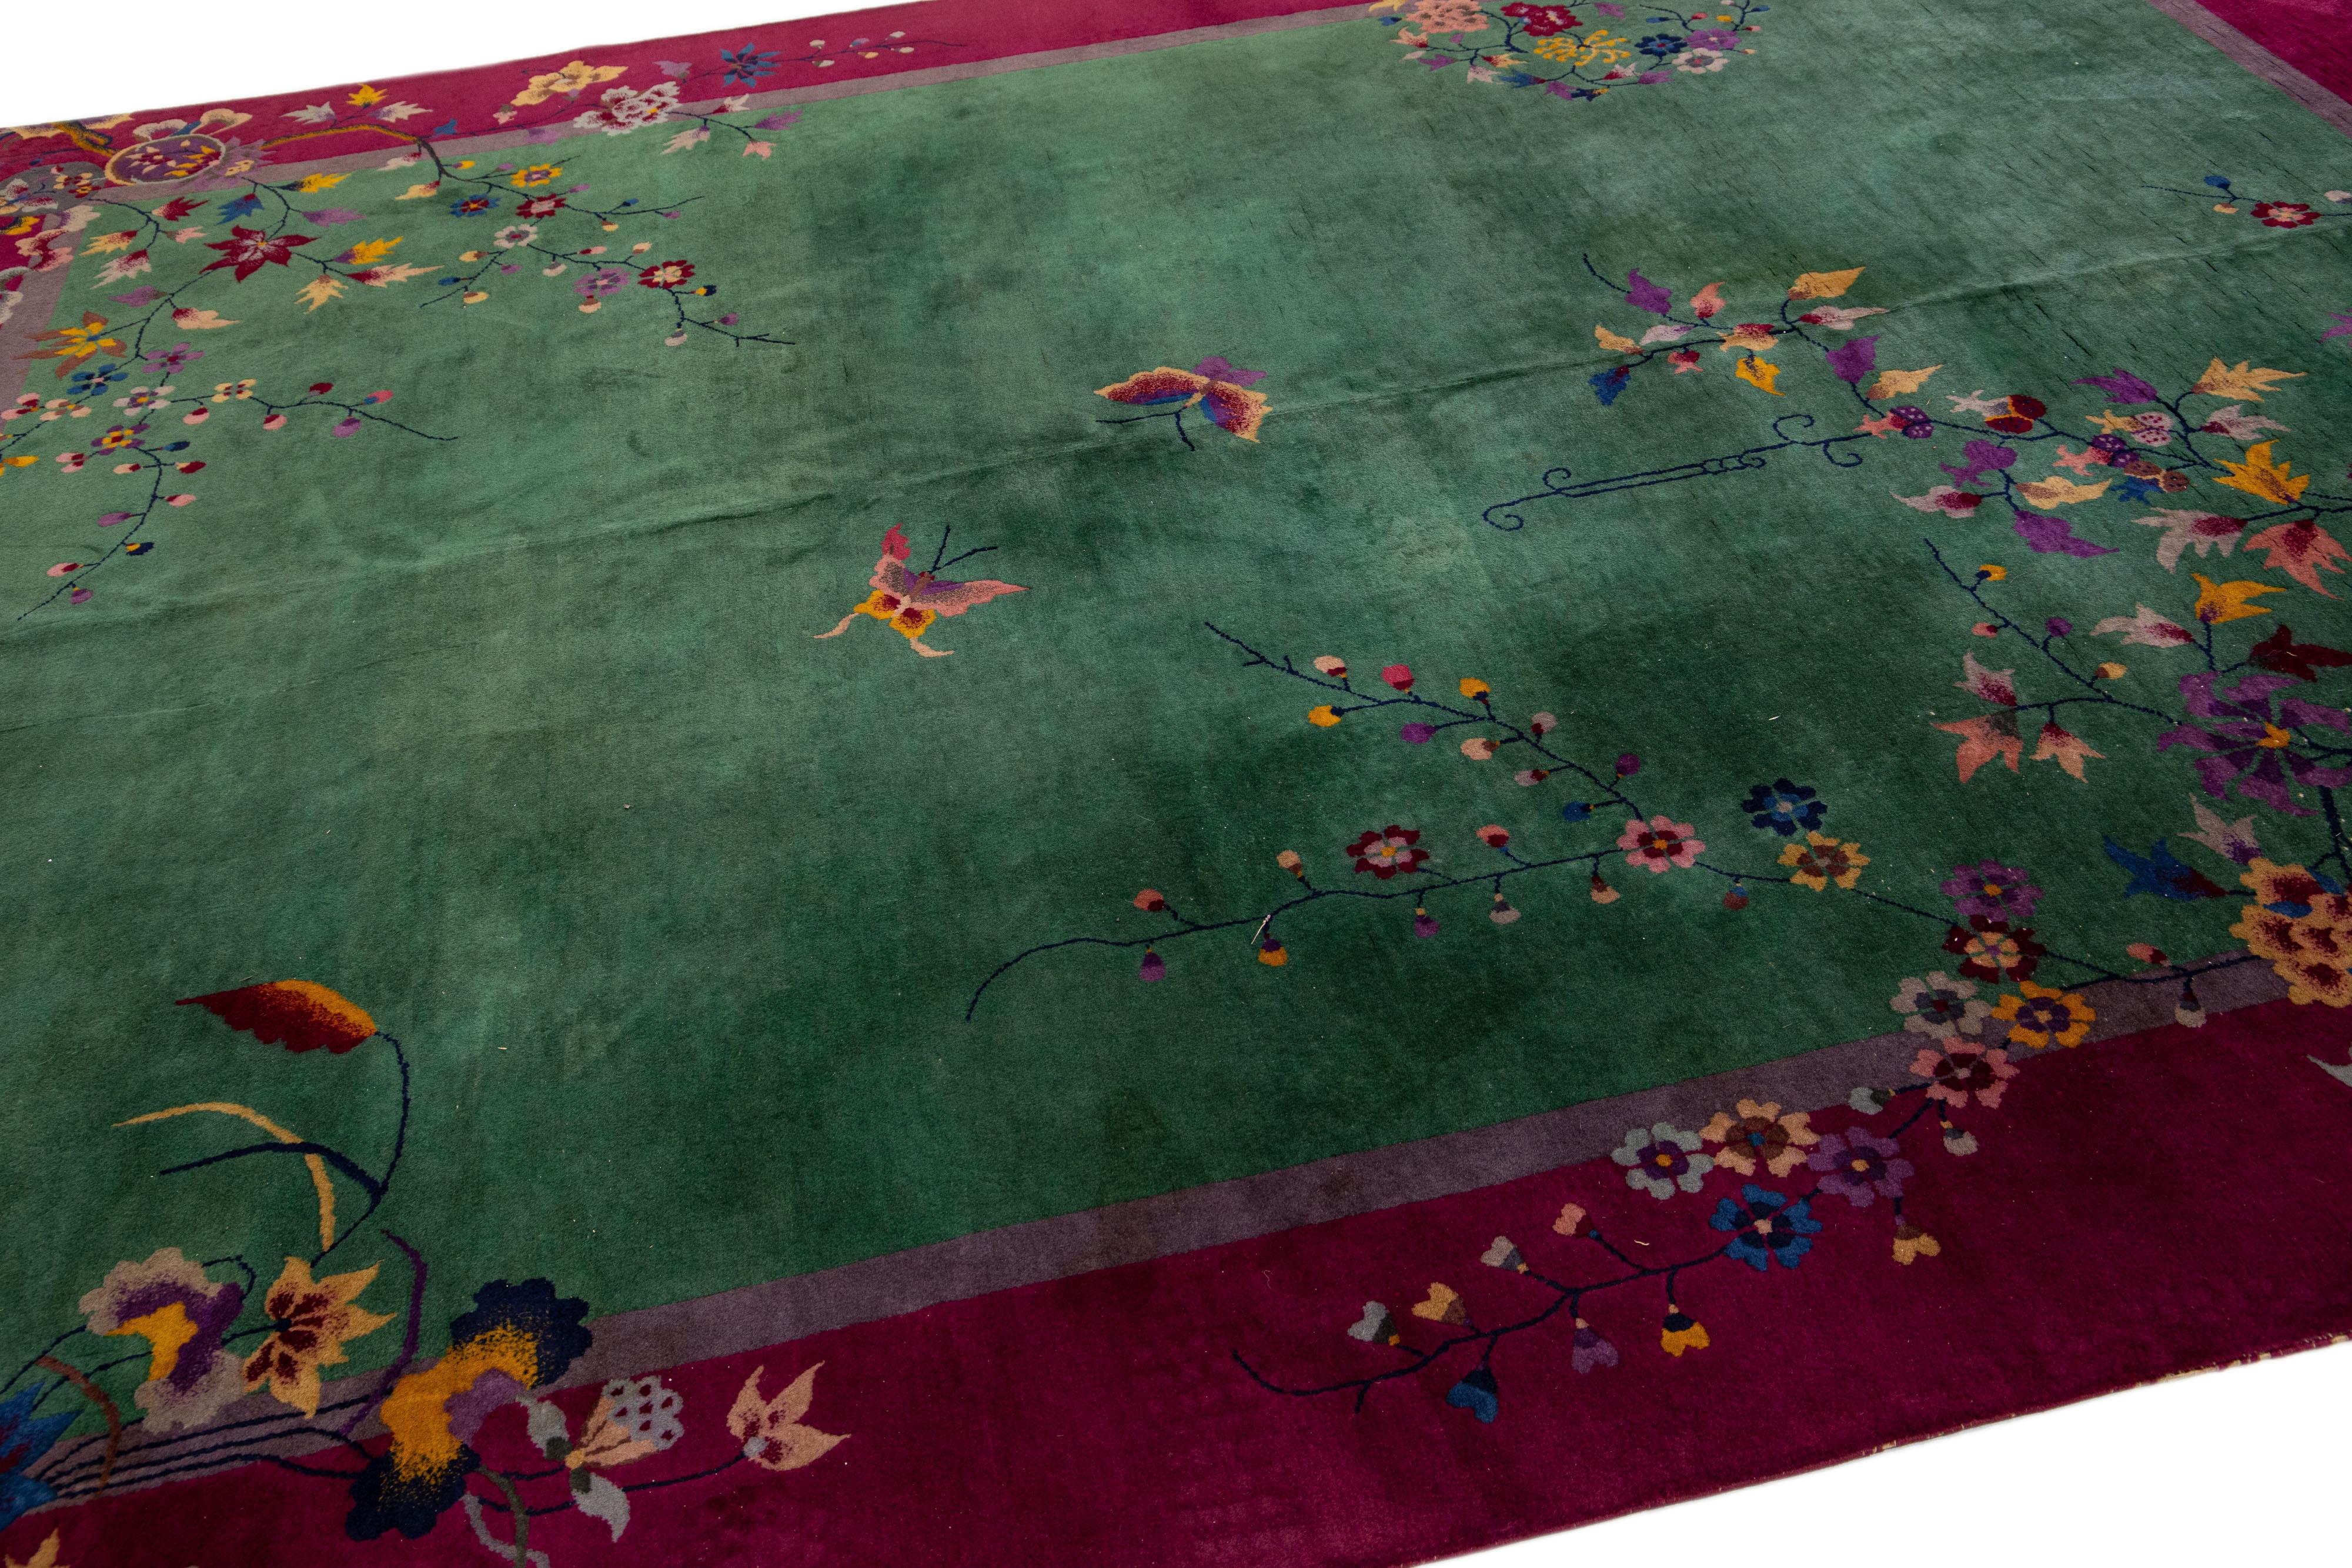 Green Chinese Art Deco Handmade Wool Rug with Floral Design In Excellent Condition For Sale In Norwalk, CT